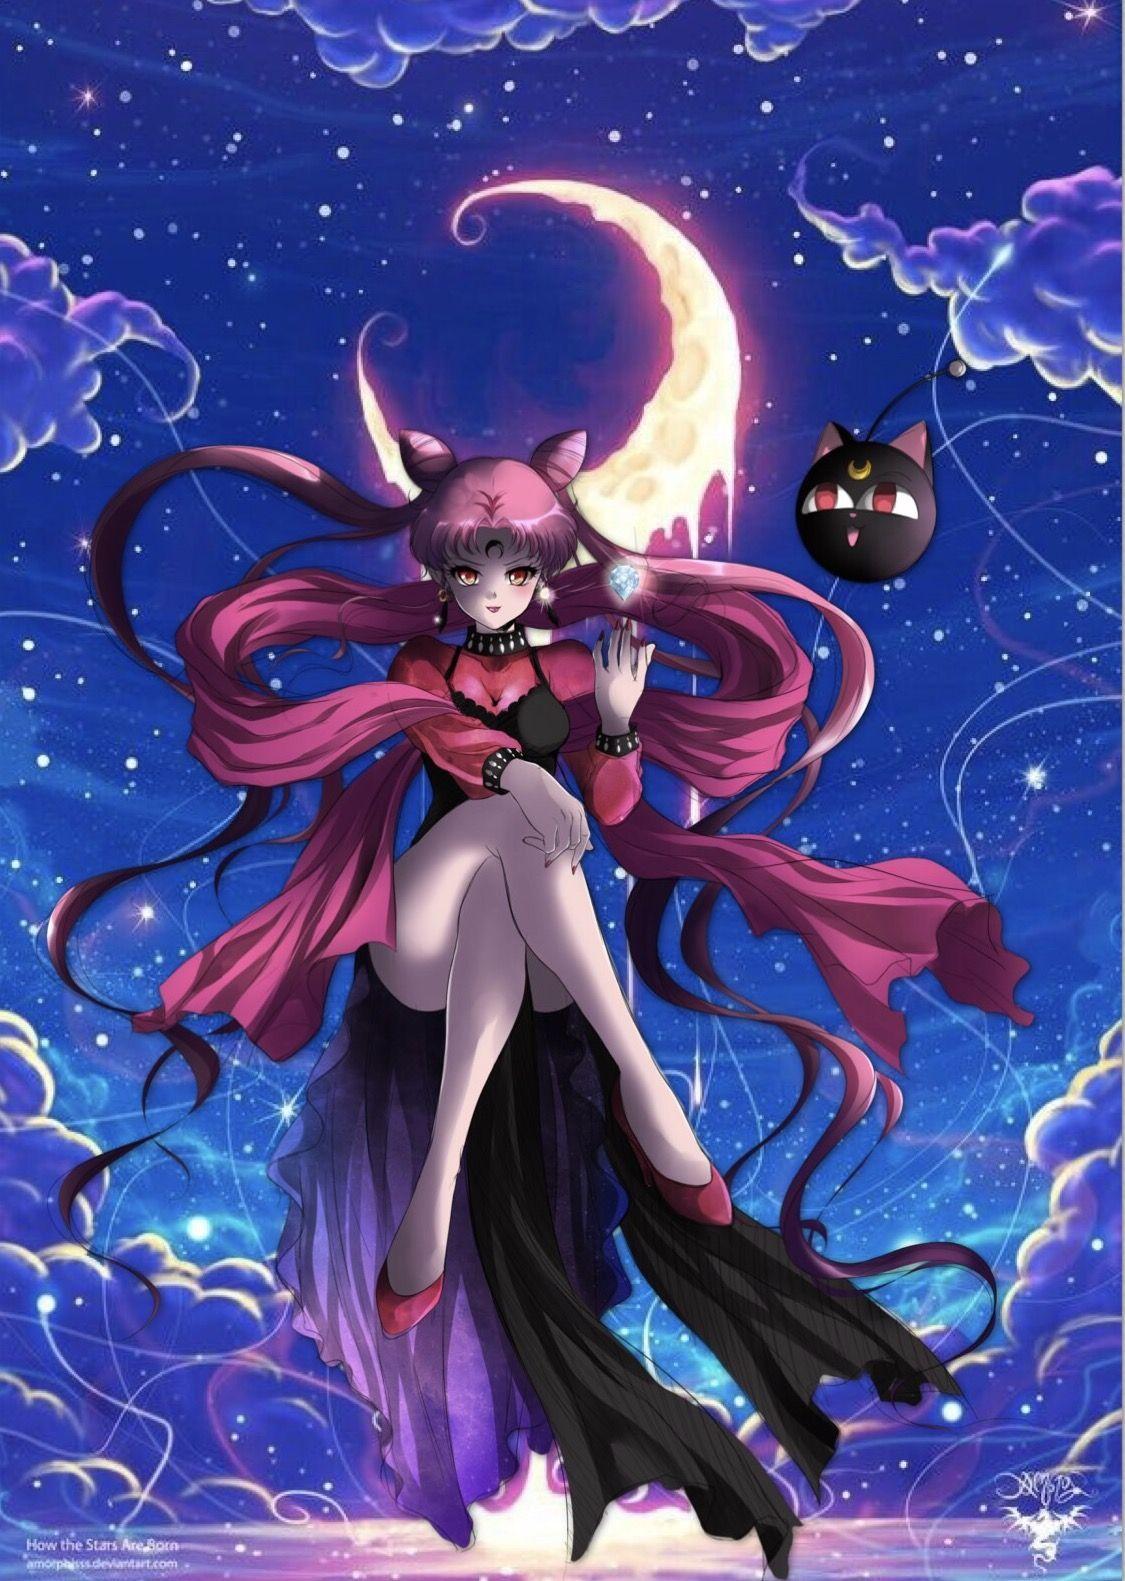 Black Lady Sailor Moon Wallpapers - Top Free Black Lady Sailor Moon ...